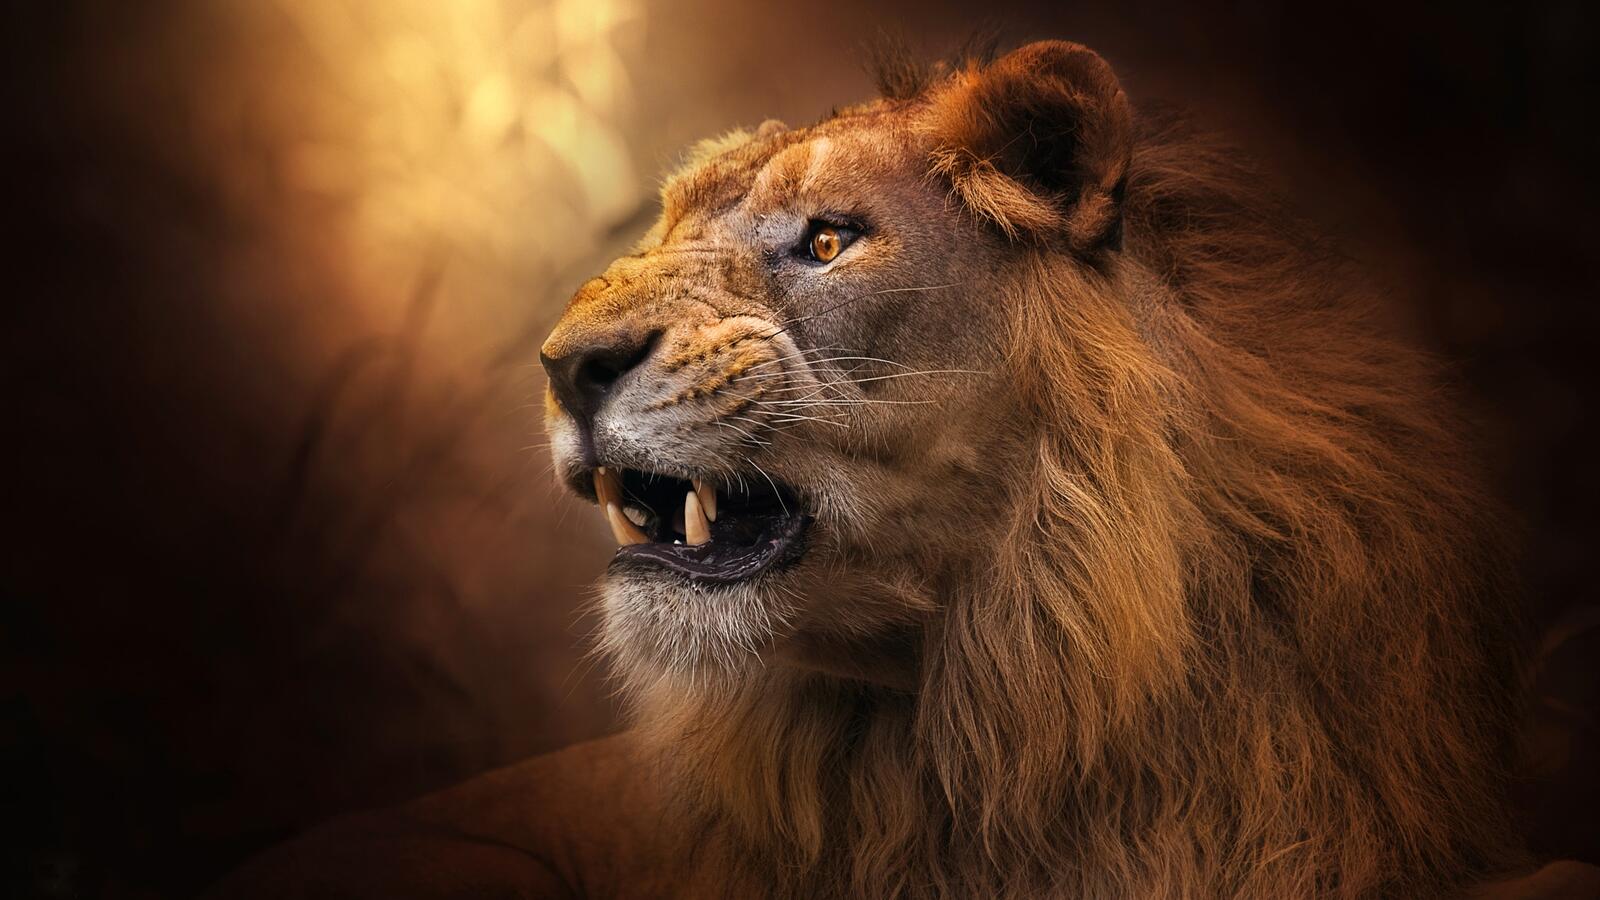 Wallpapers predator lion canines on the desktop